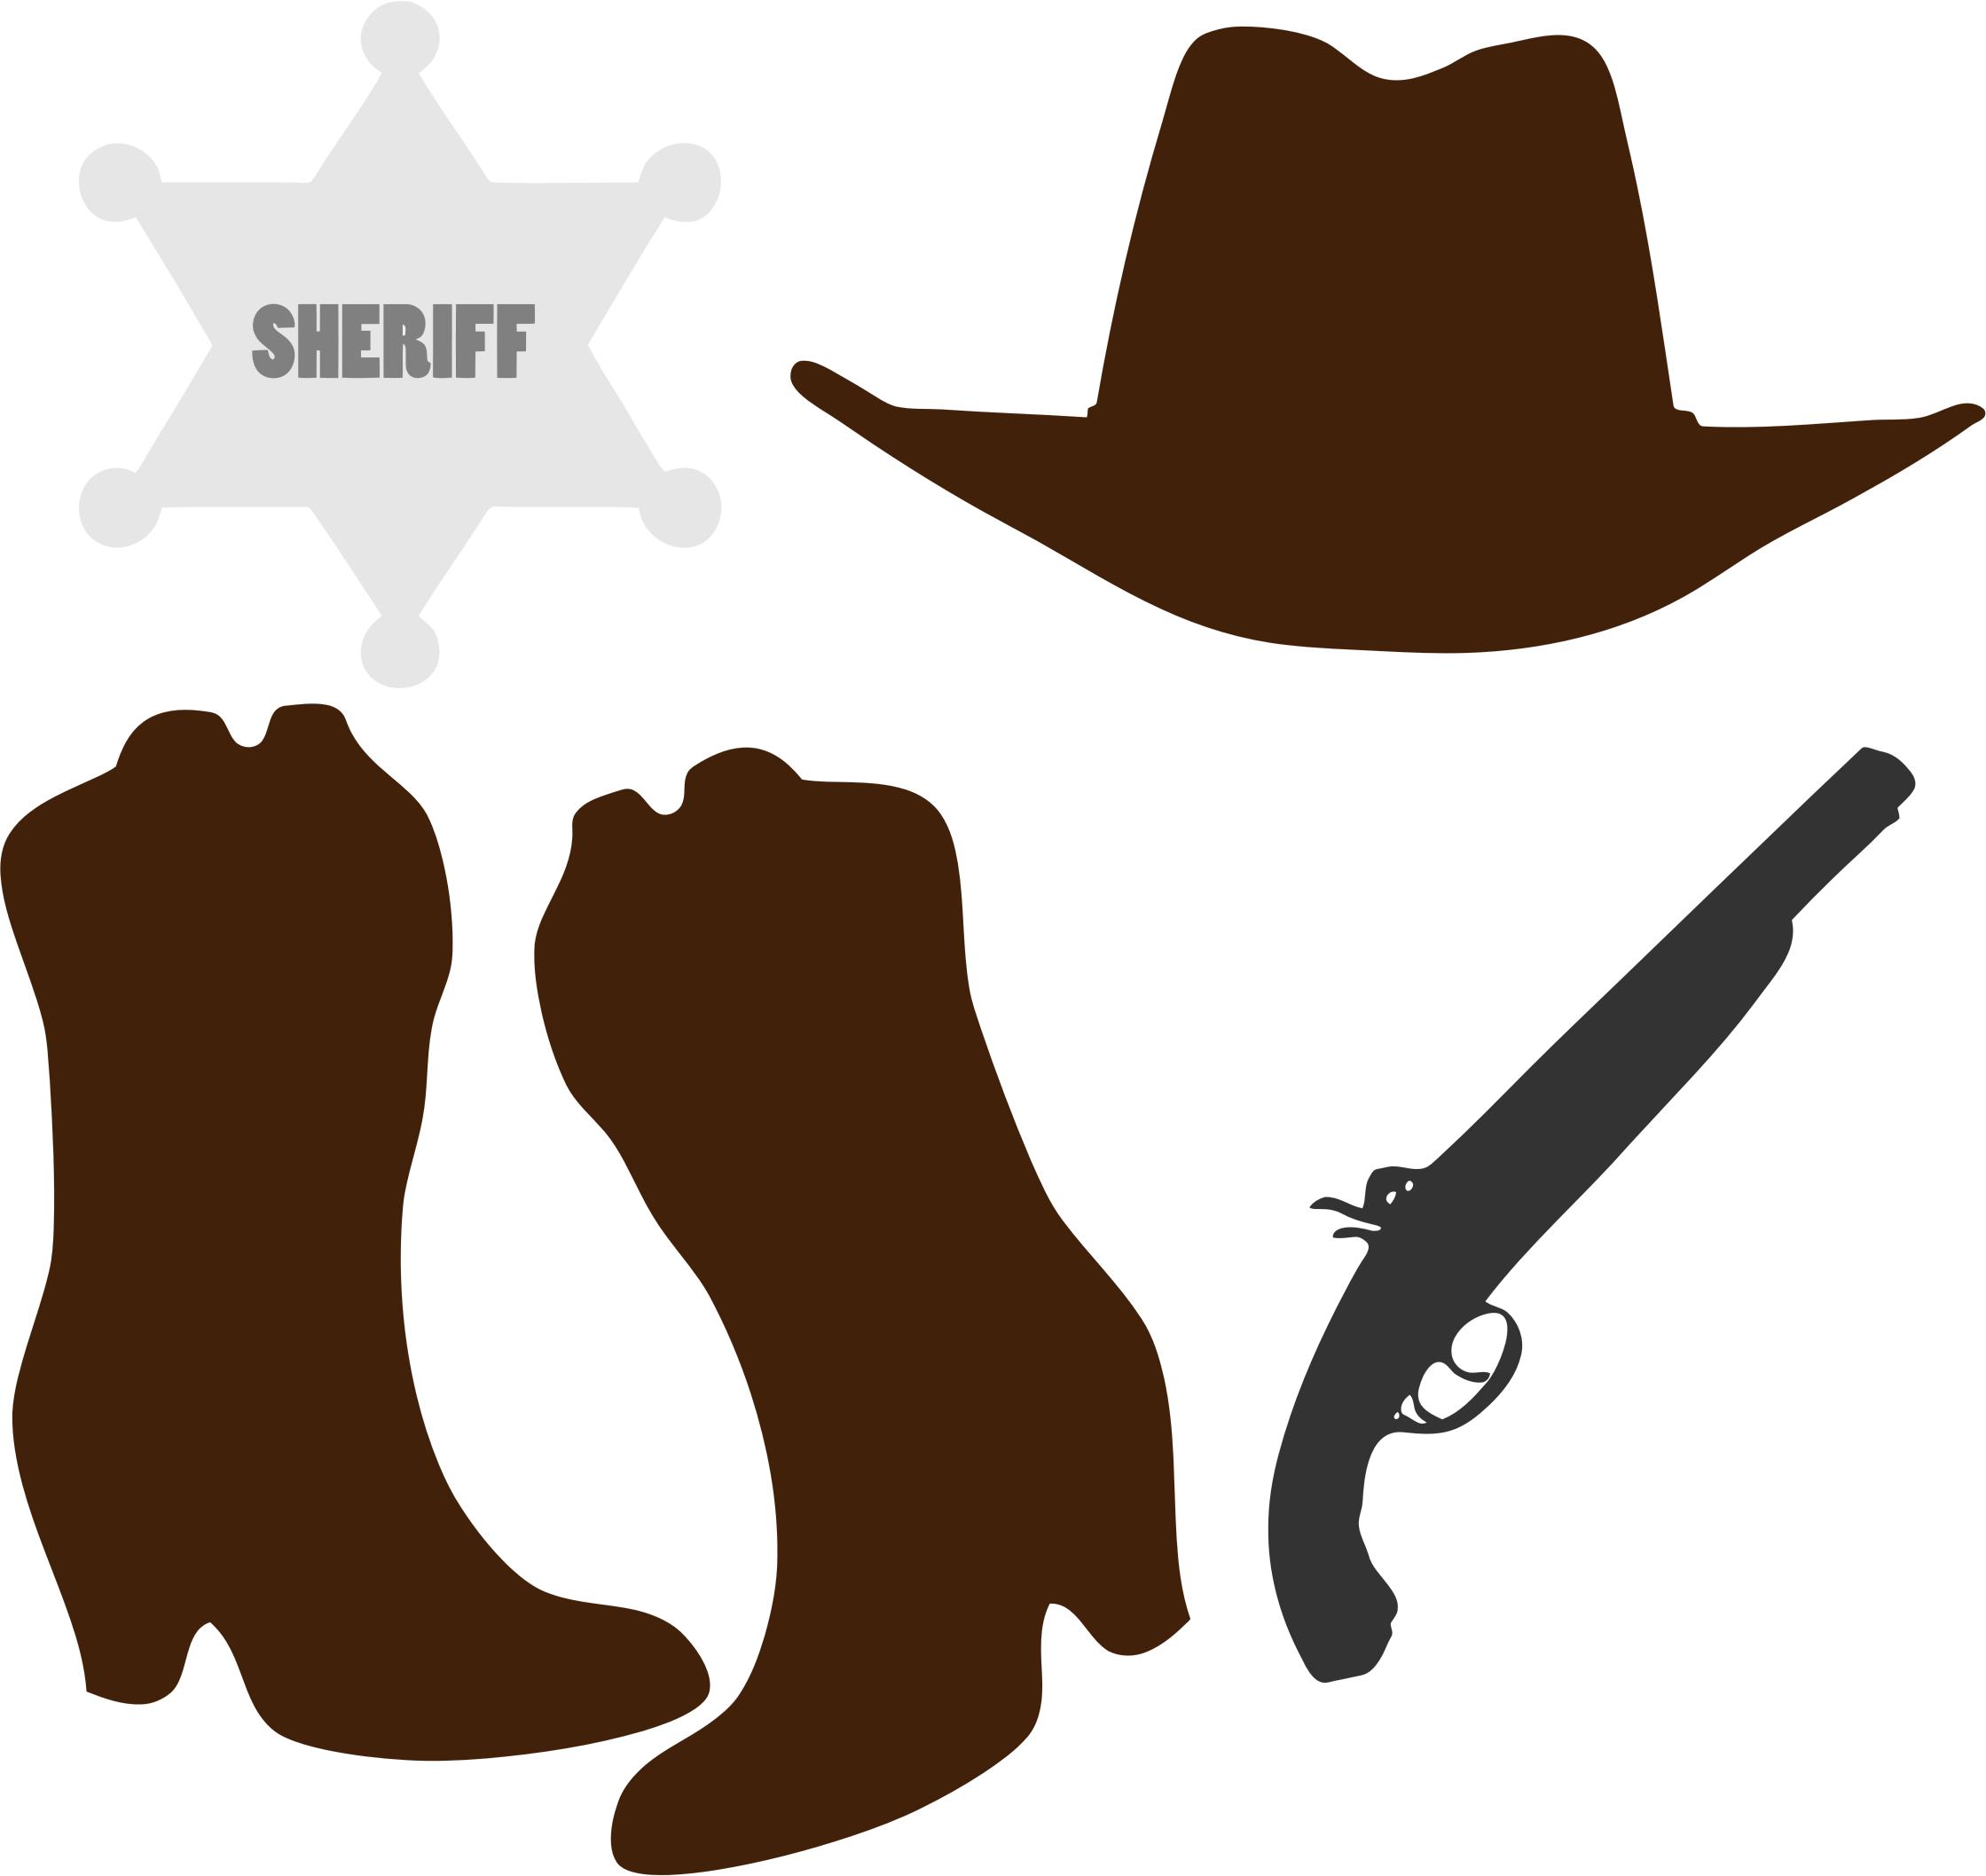 Cowboy Clothing And Accessories png